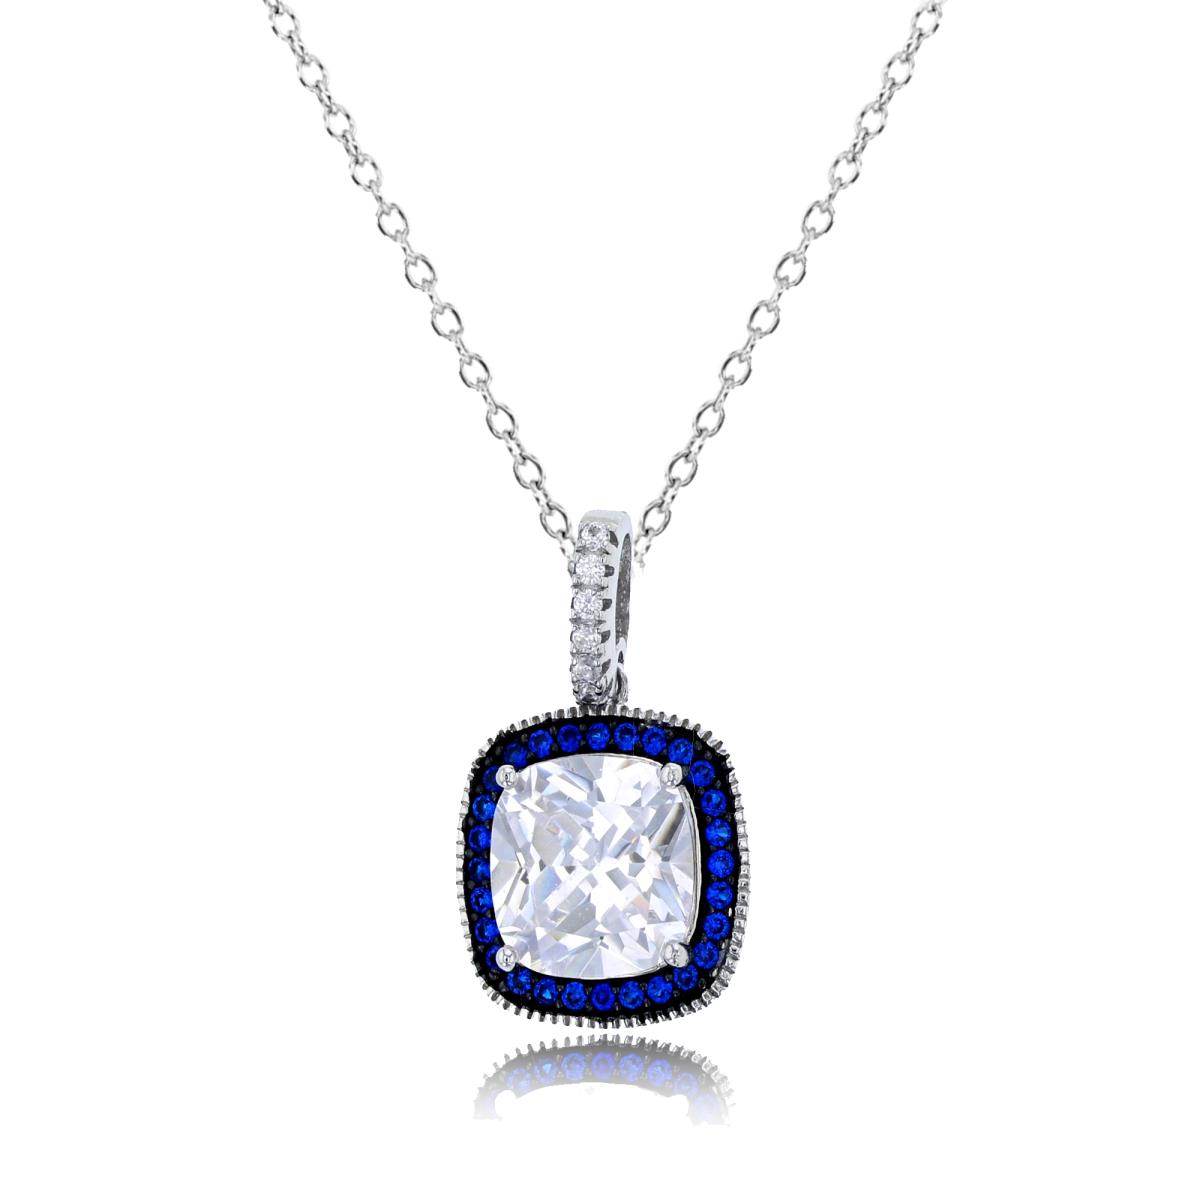 Sterling Silver Black & White 8mm White Cushion Cut CZ Sapphire Halo 18" Necklace